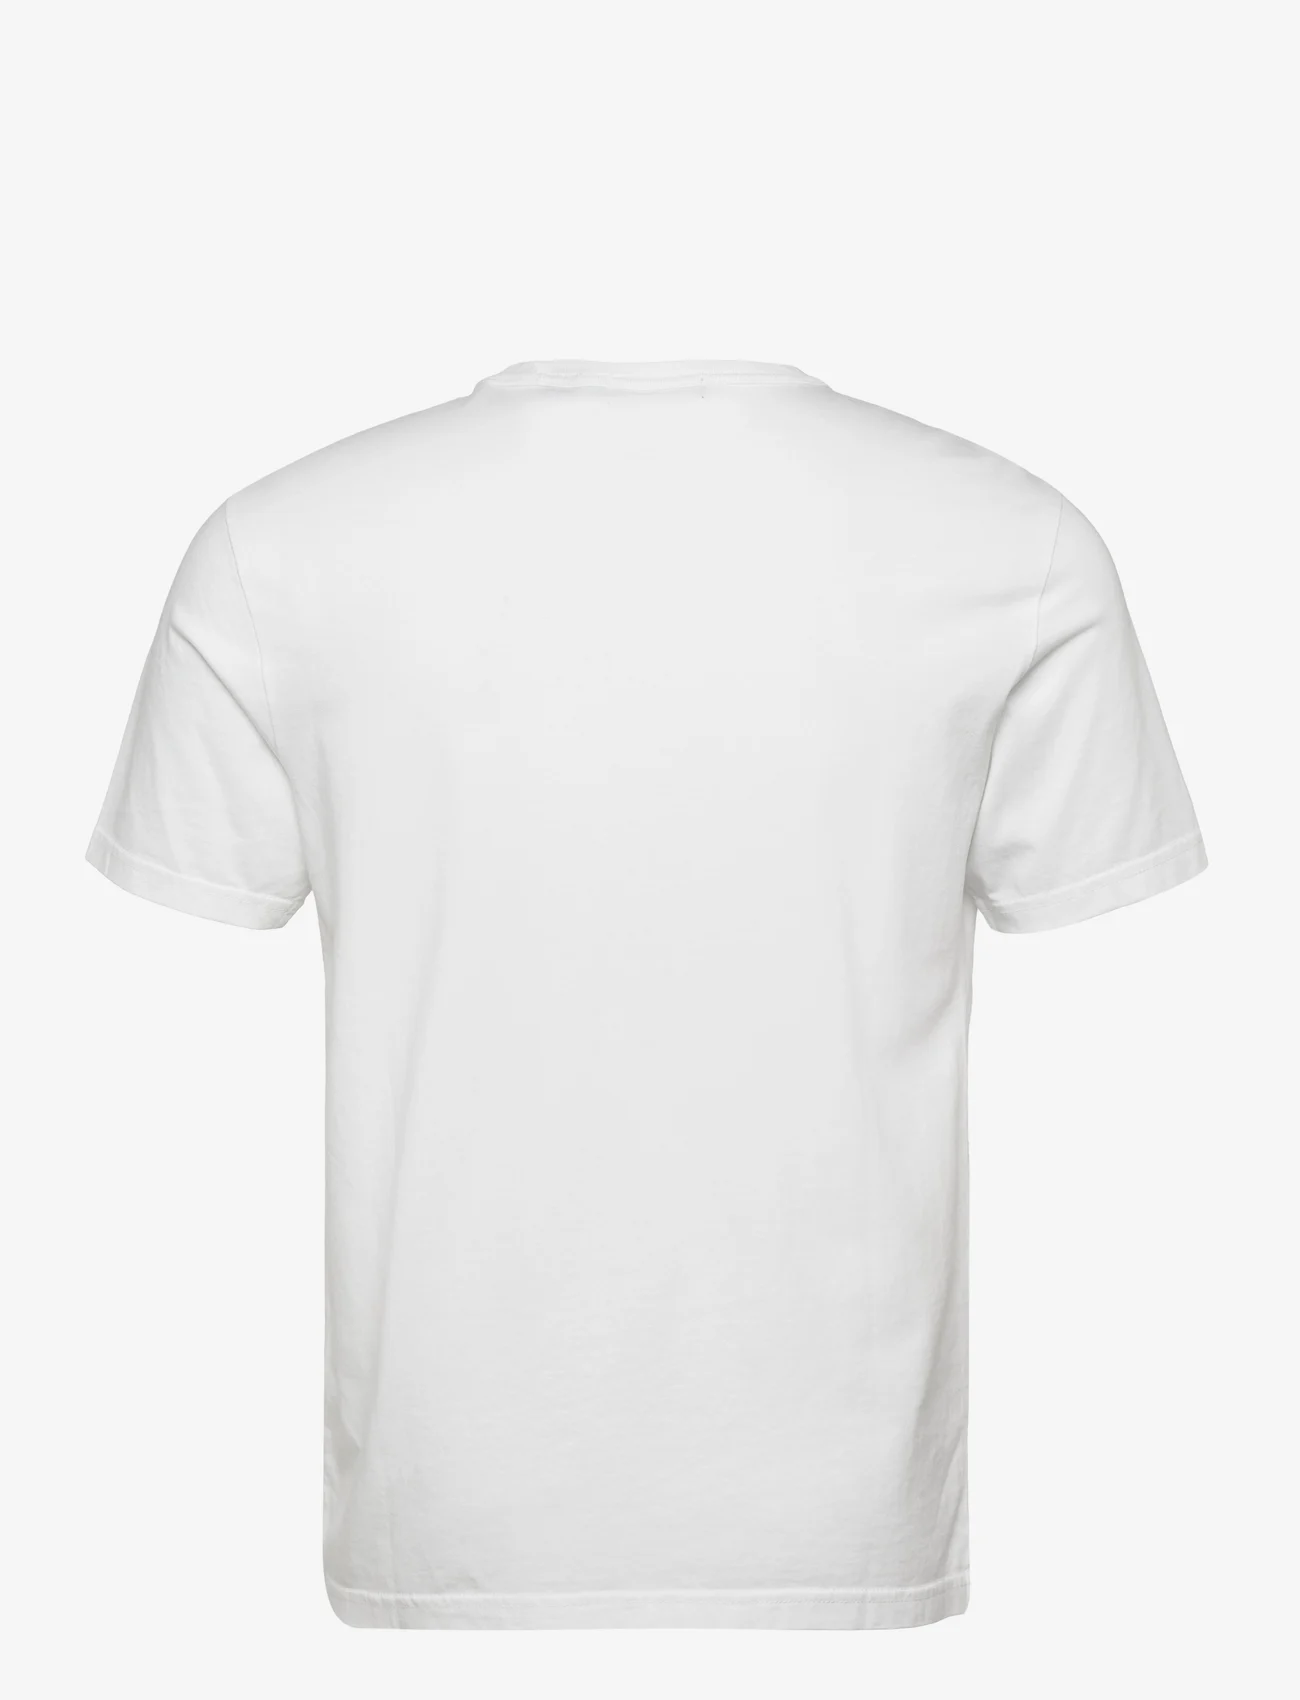 Dockers - ORIGINAL TEE LUCENT - lowest prices - neutrals - 1